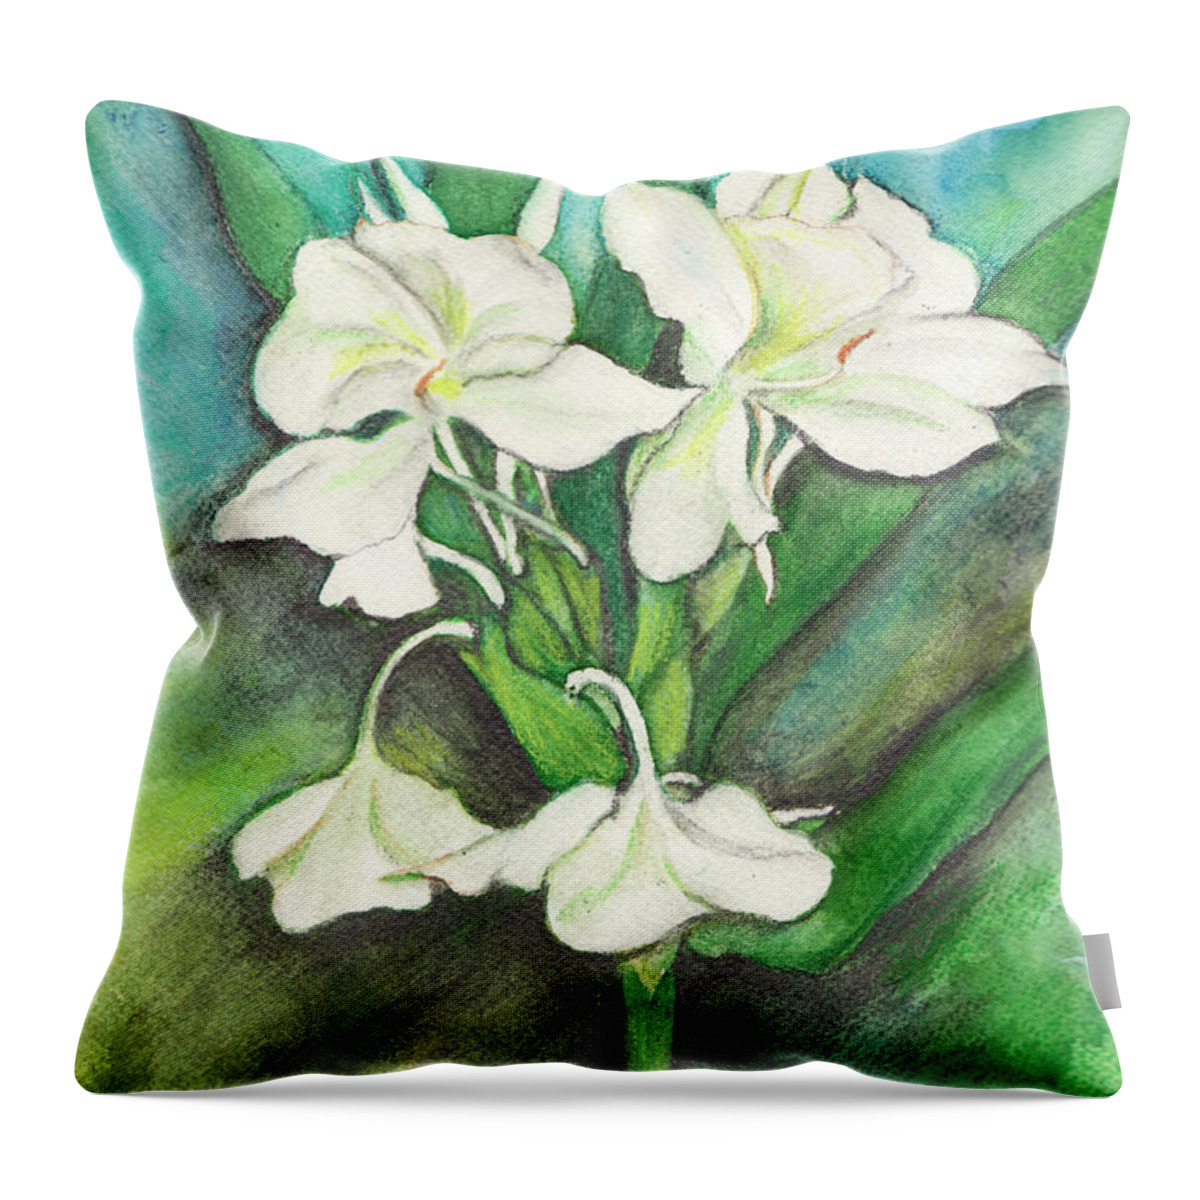  Ginger Lily Throw Pillow featuring the painting Ginger Lilies by Carla Parris